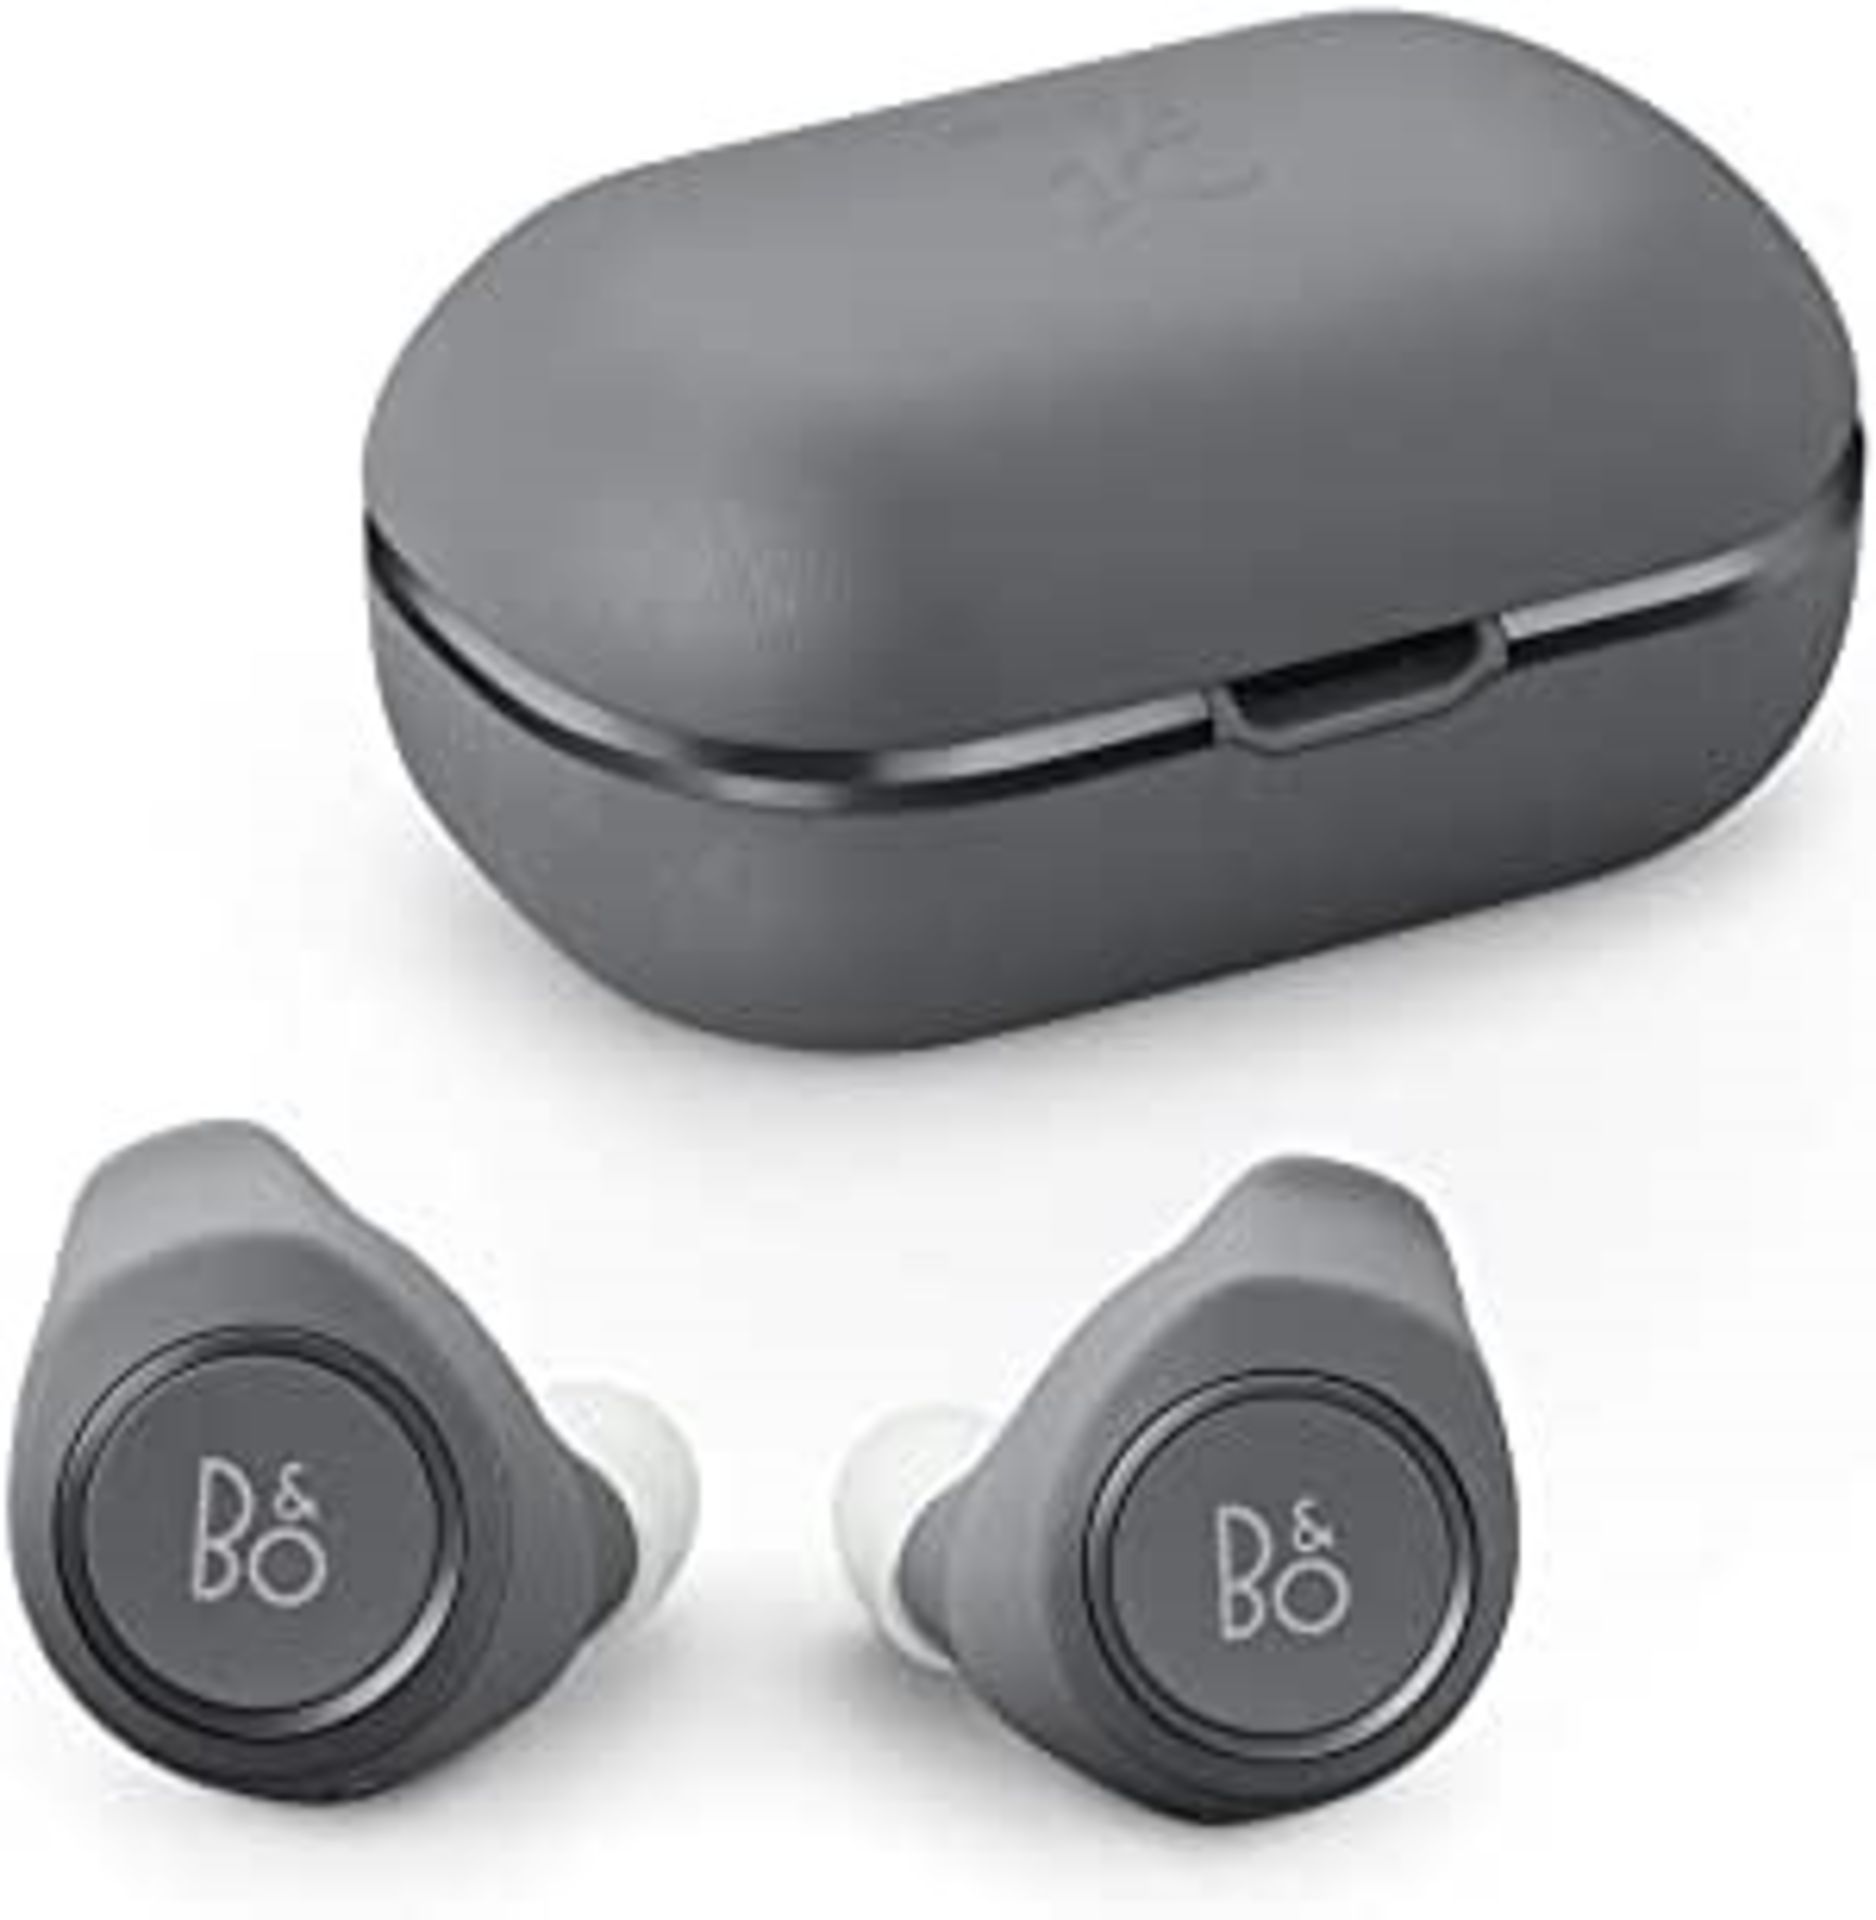 1 x set of Grey Bang and Olufsen E8 wireless earphones, boxed and brand new, Collection Tuesday :